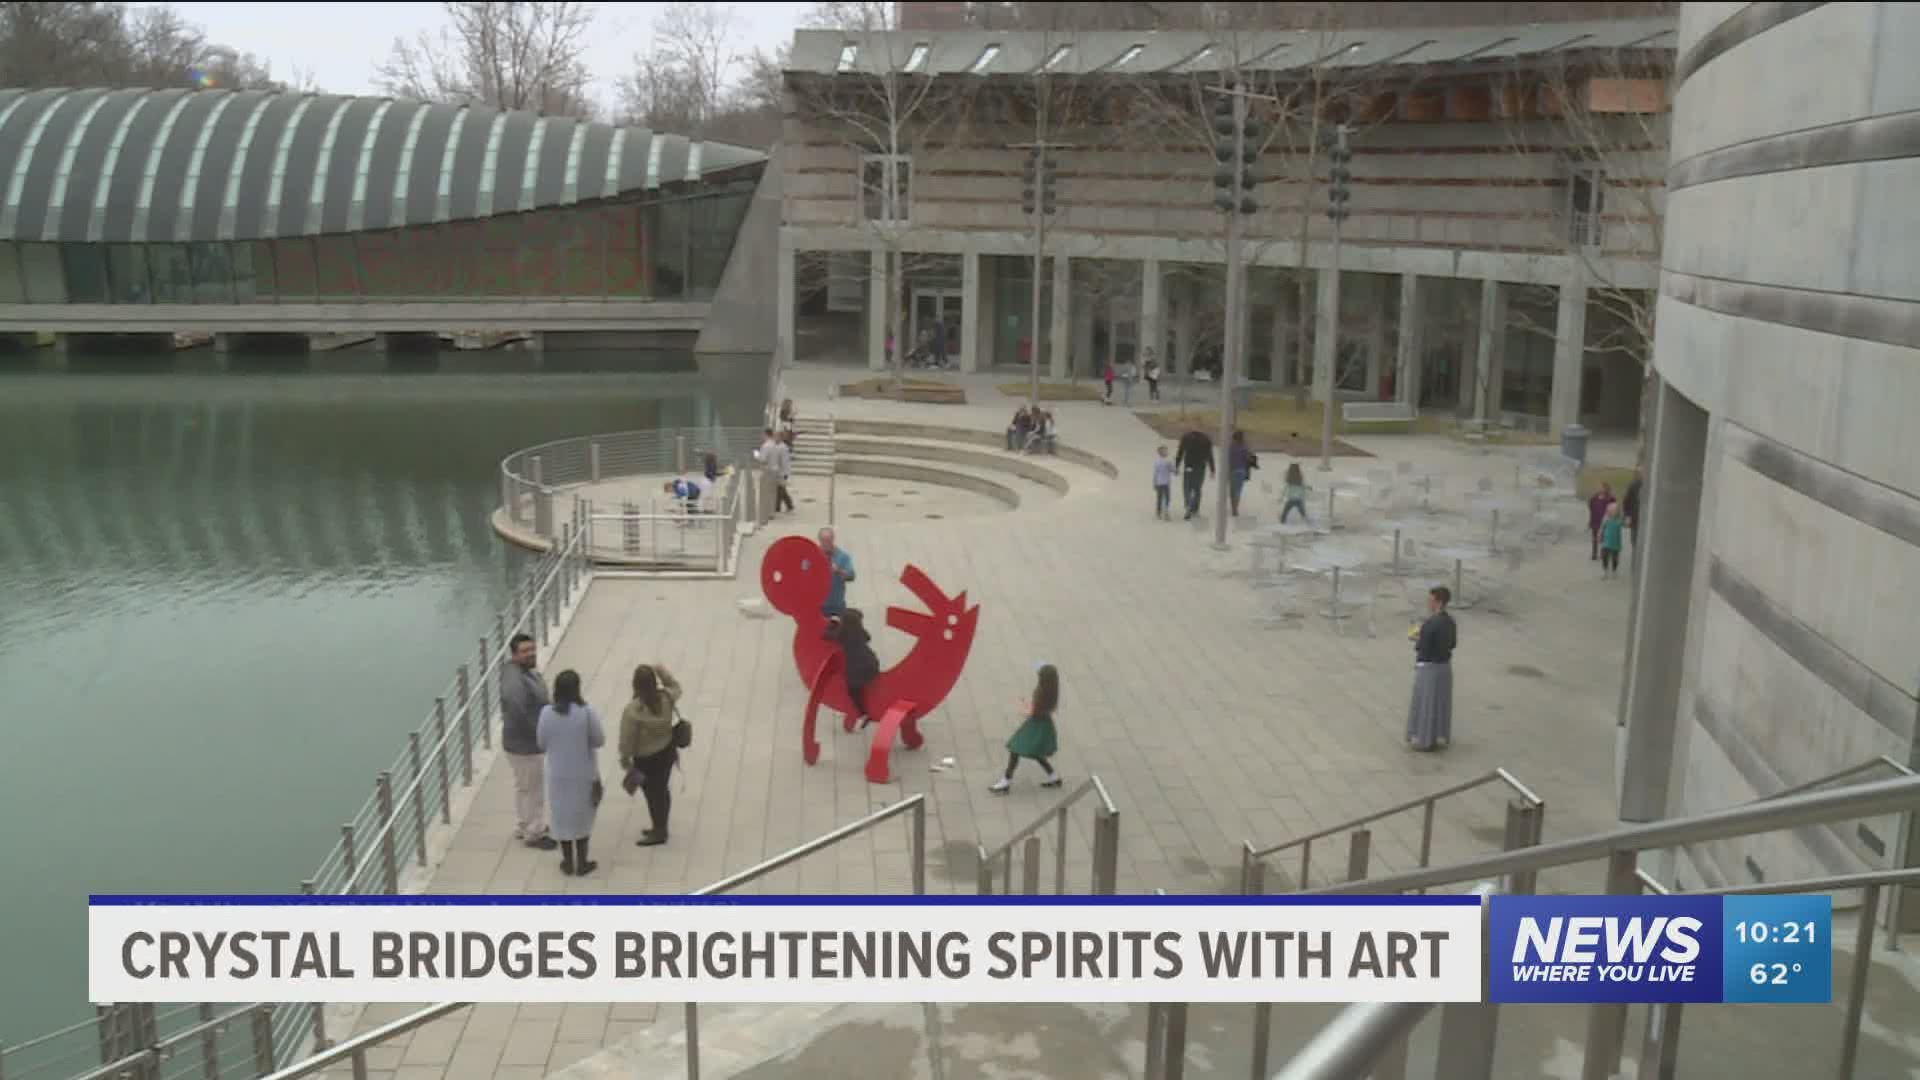 Crystal Bridges launches campaign to brighten spirits during COVID-19 pandemic